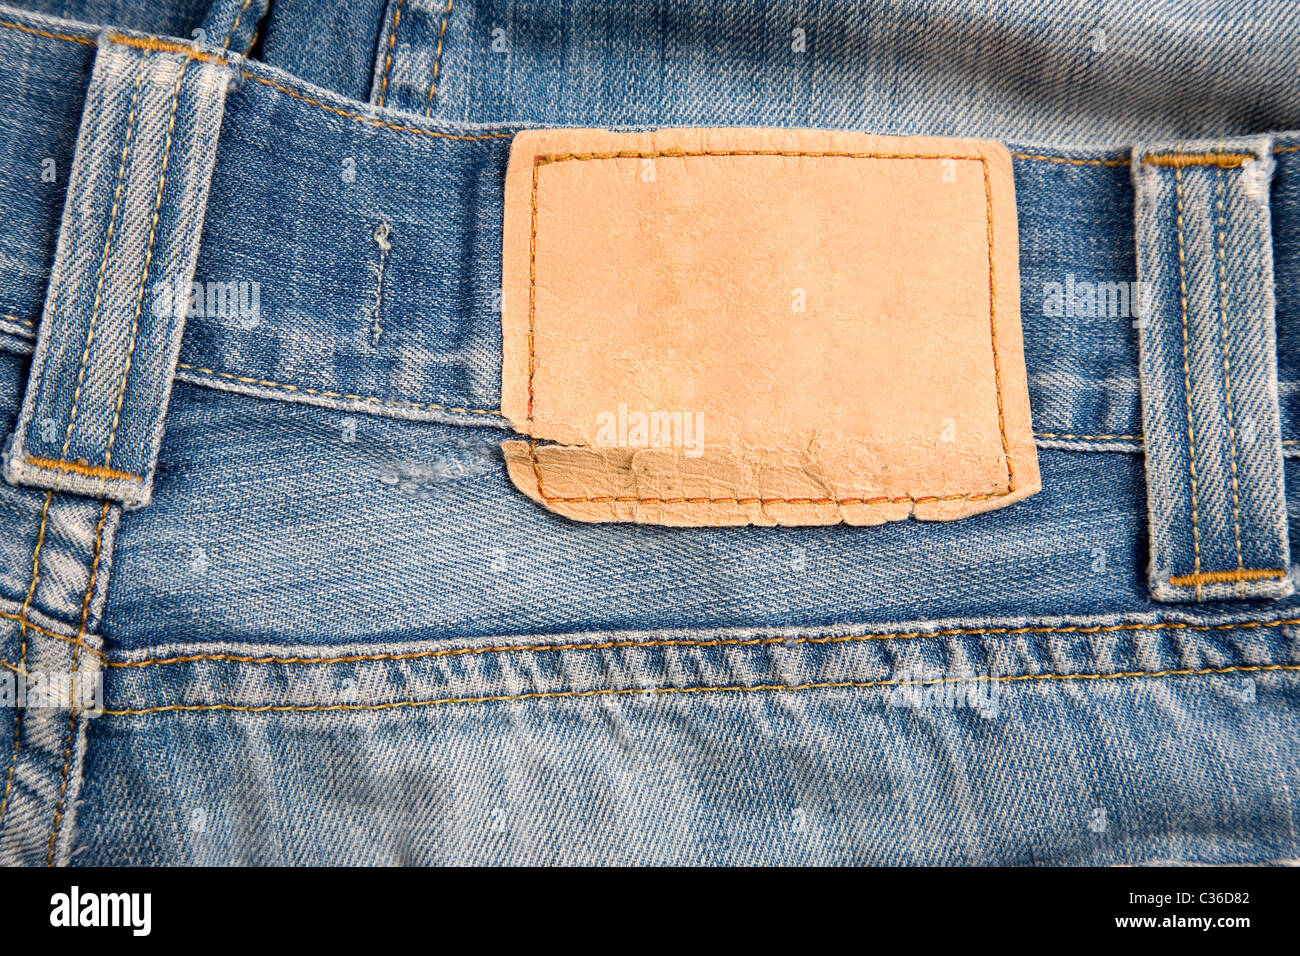 front view of denim label, blue jeans and leather label Stock Photo - Alamy